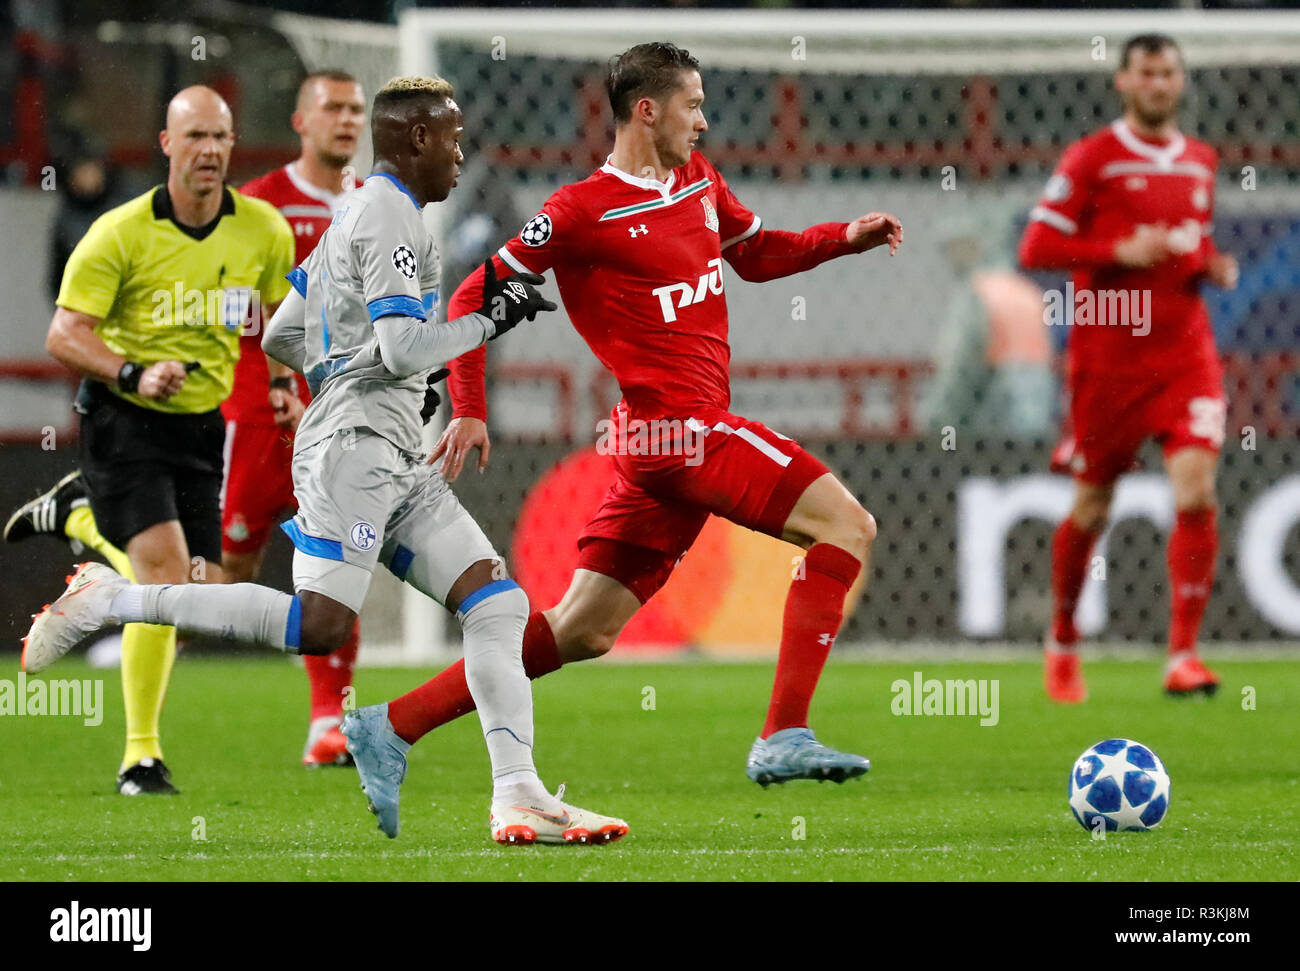 MOSCOW, RUSSIA - OCTOBER 03: Aleksei Miranchuk (C) of FC Lokomotiv Moscow and Hamza Mendyl (L) of FC Schalke 04 vie for the ball during the Group D match of the UEFA Champions League between FC Lokomotiv Moscow and FC Schalke 04 at Lokomotiv Stadium on October 3, 2018 in Moscow, Russia. (MB Media) Stock Photo